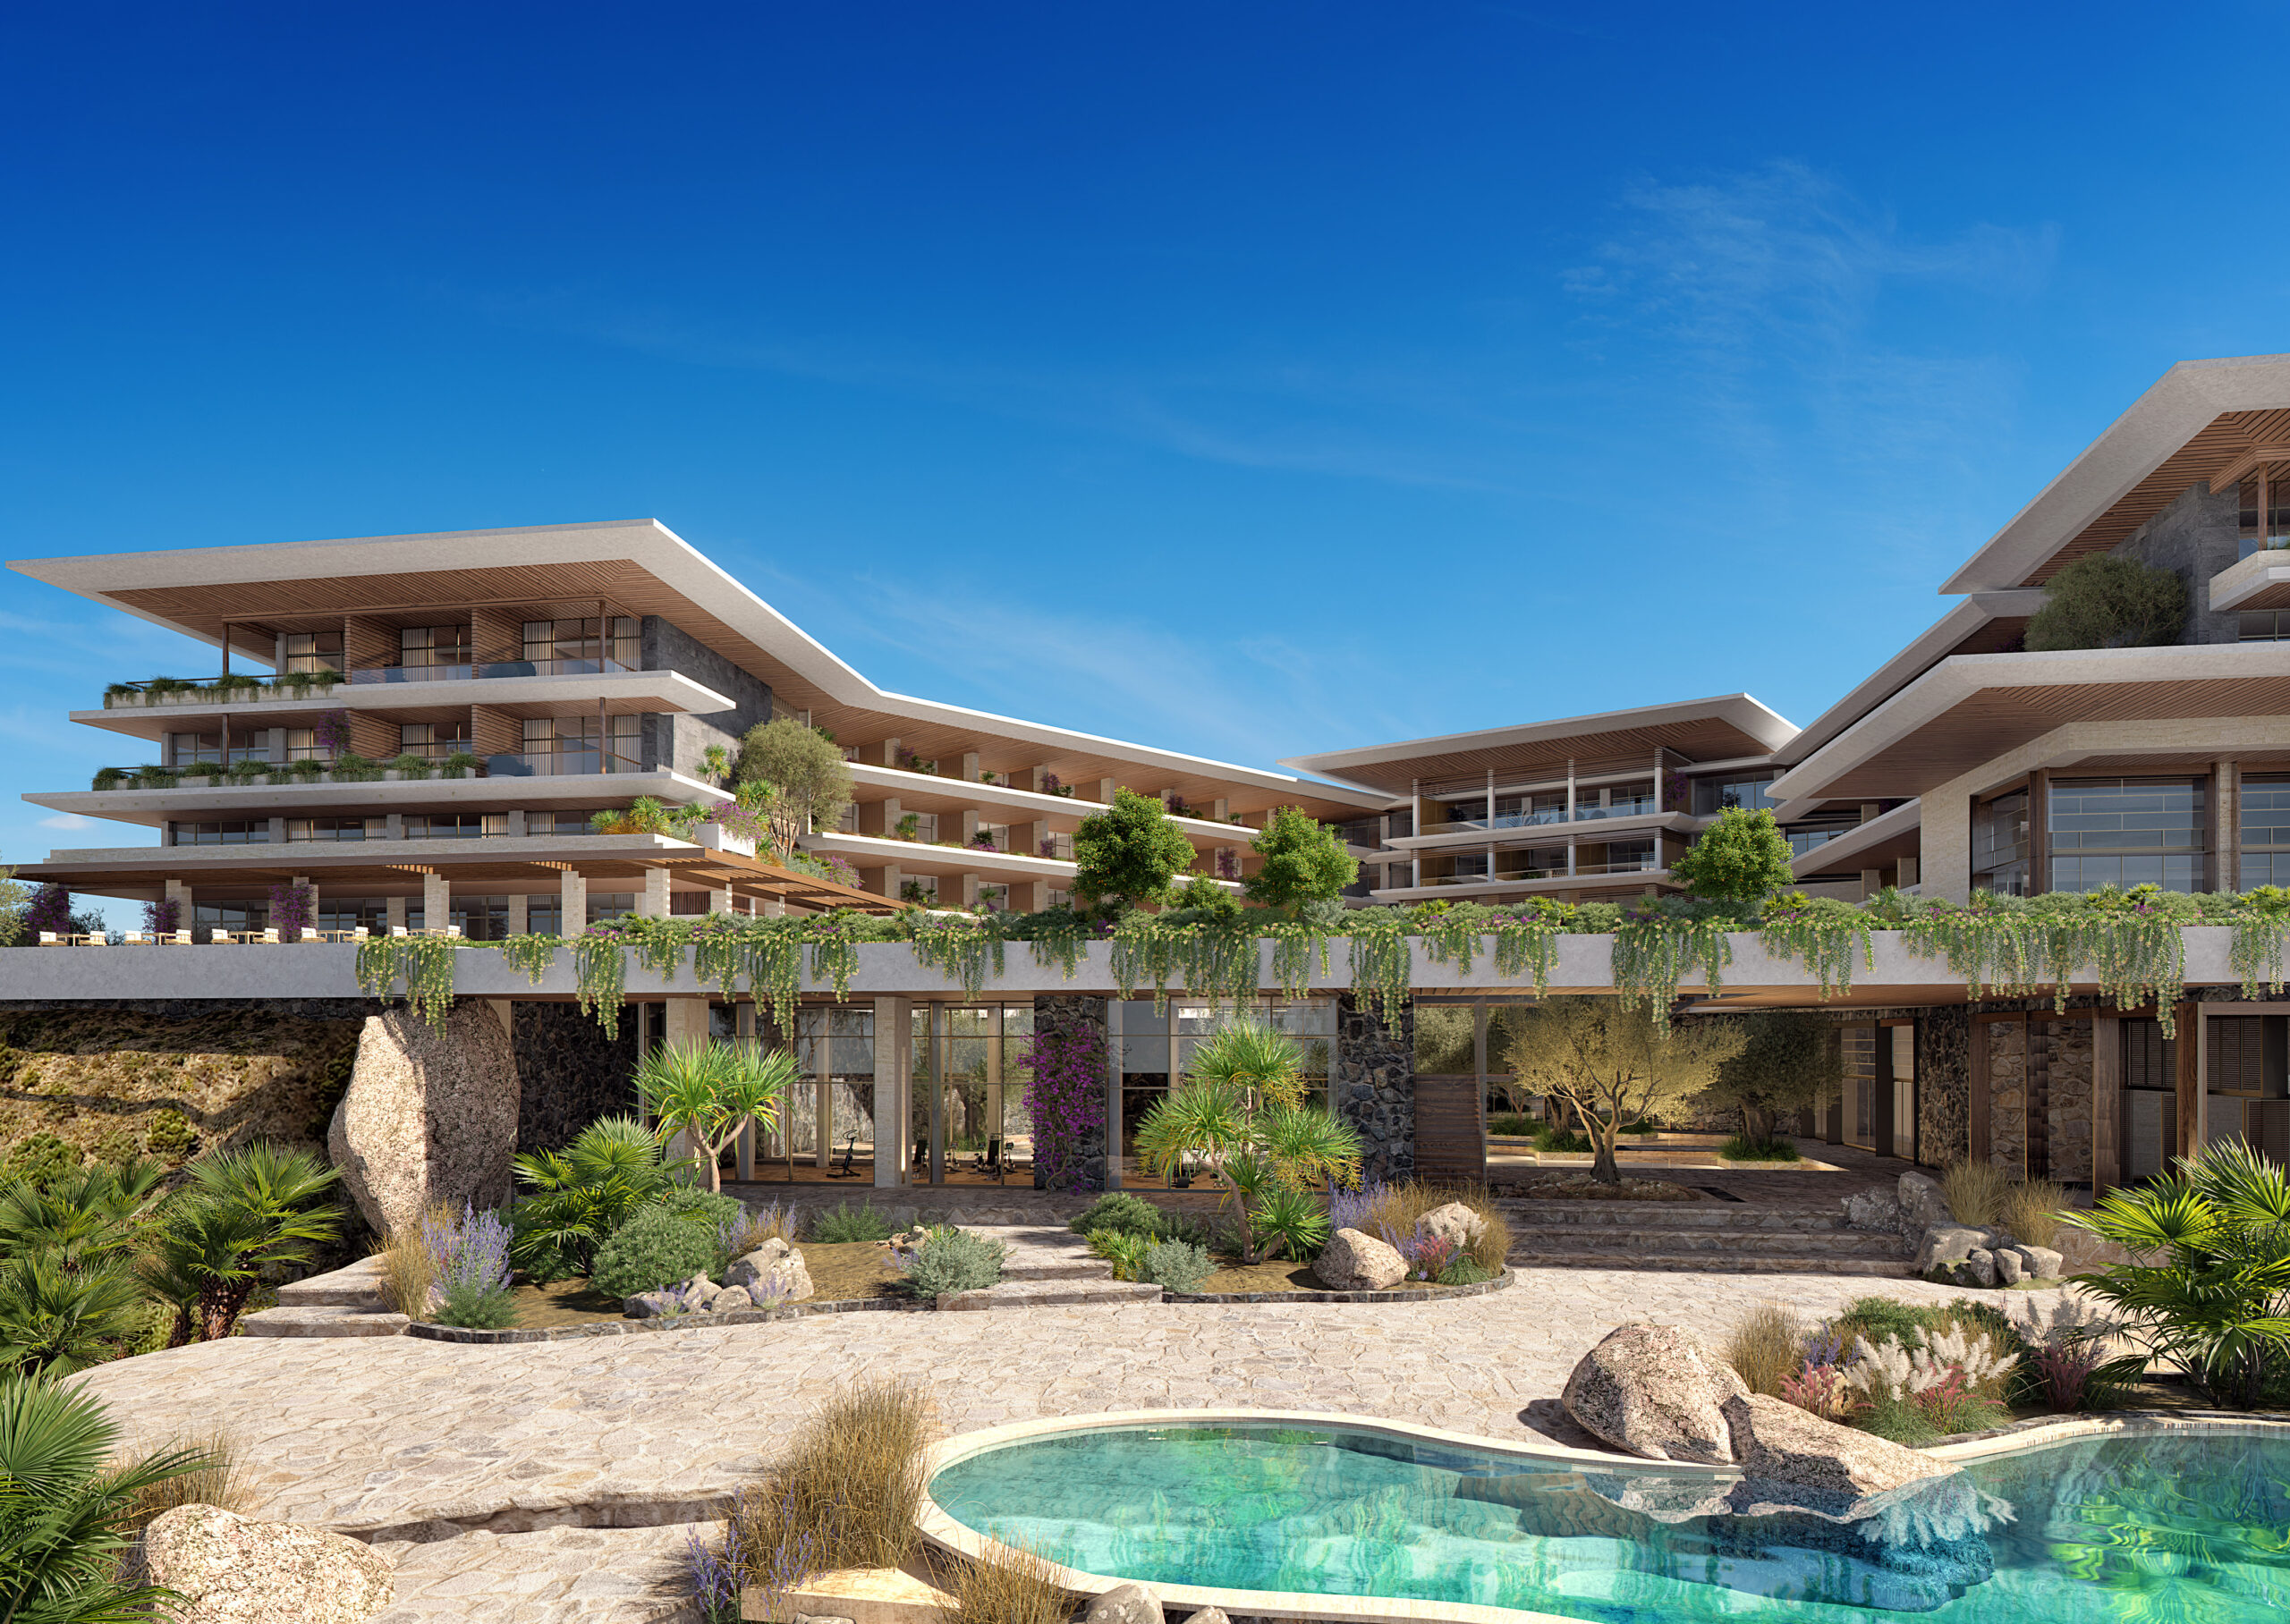 Banyan Tree Group Announces First Property in Spain